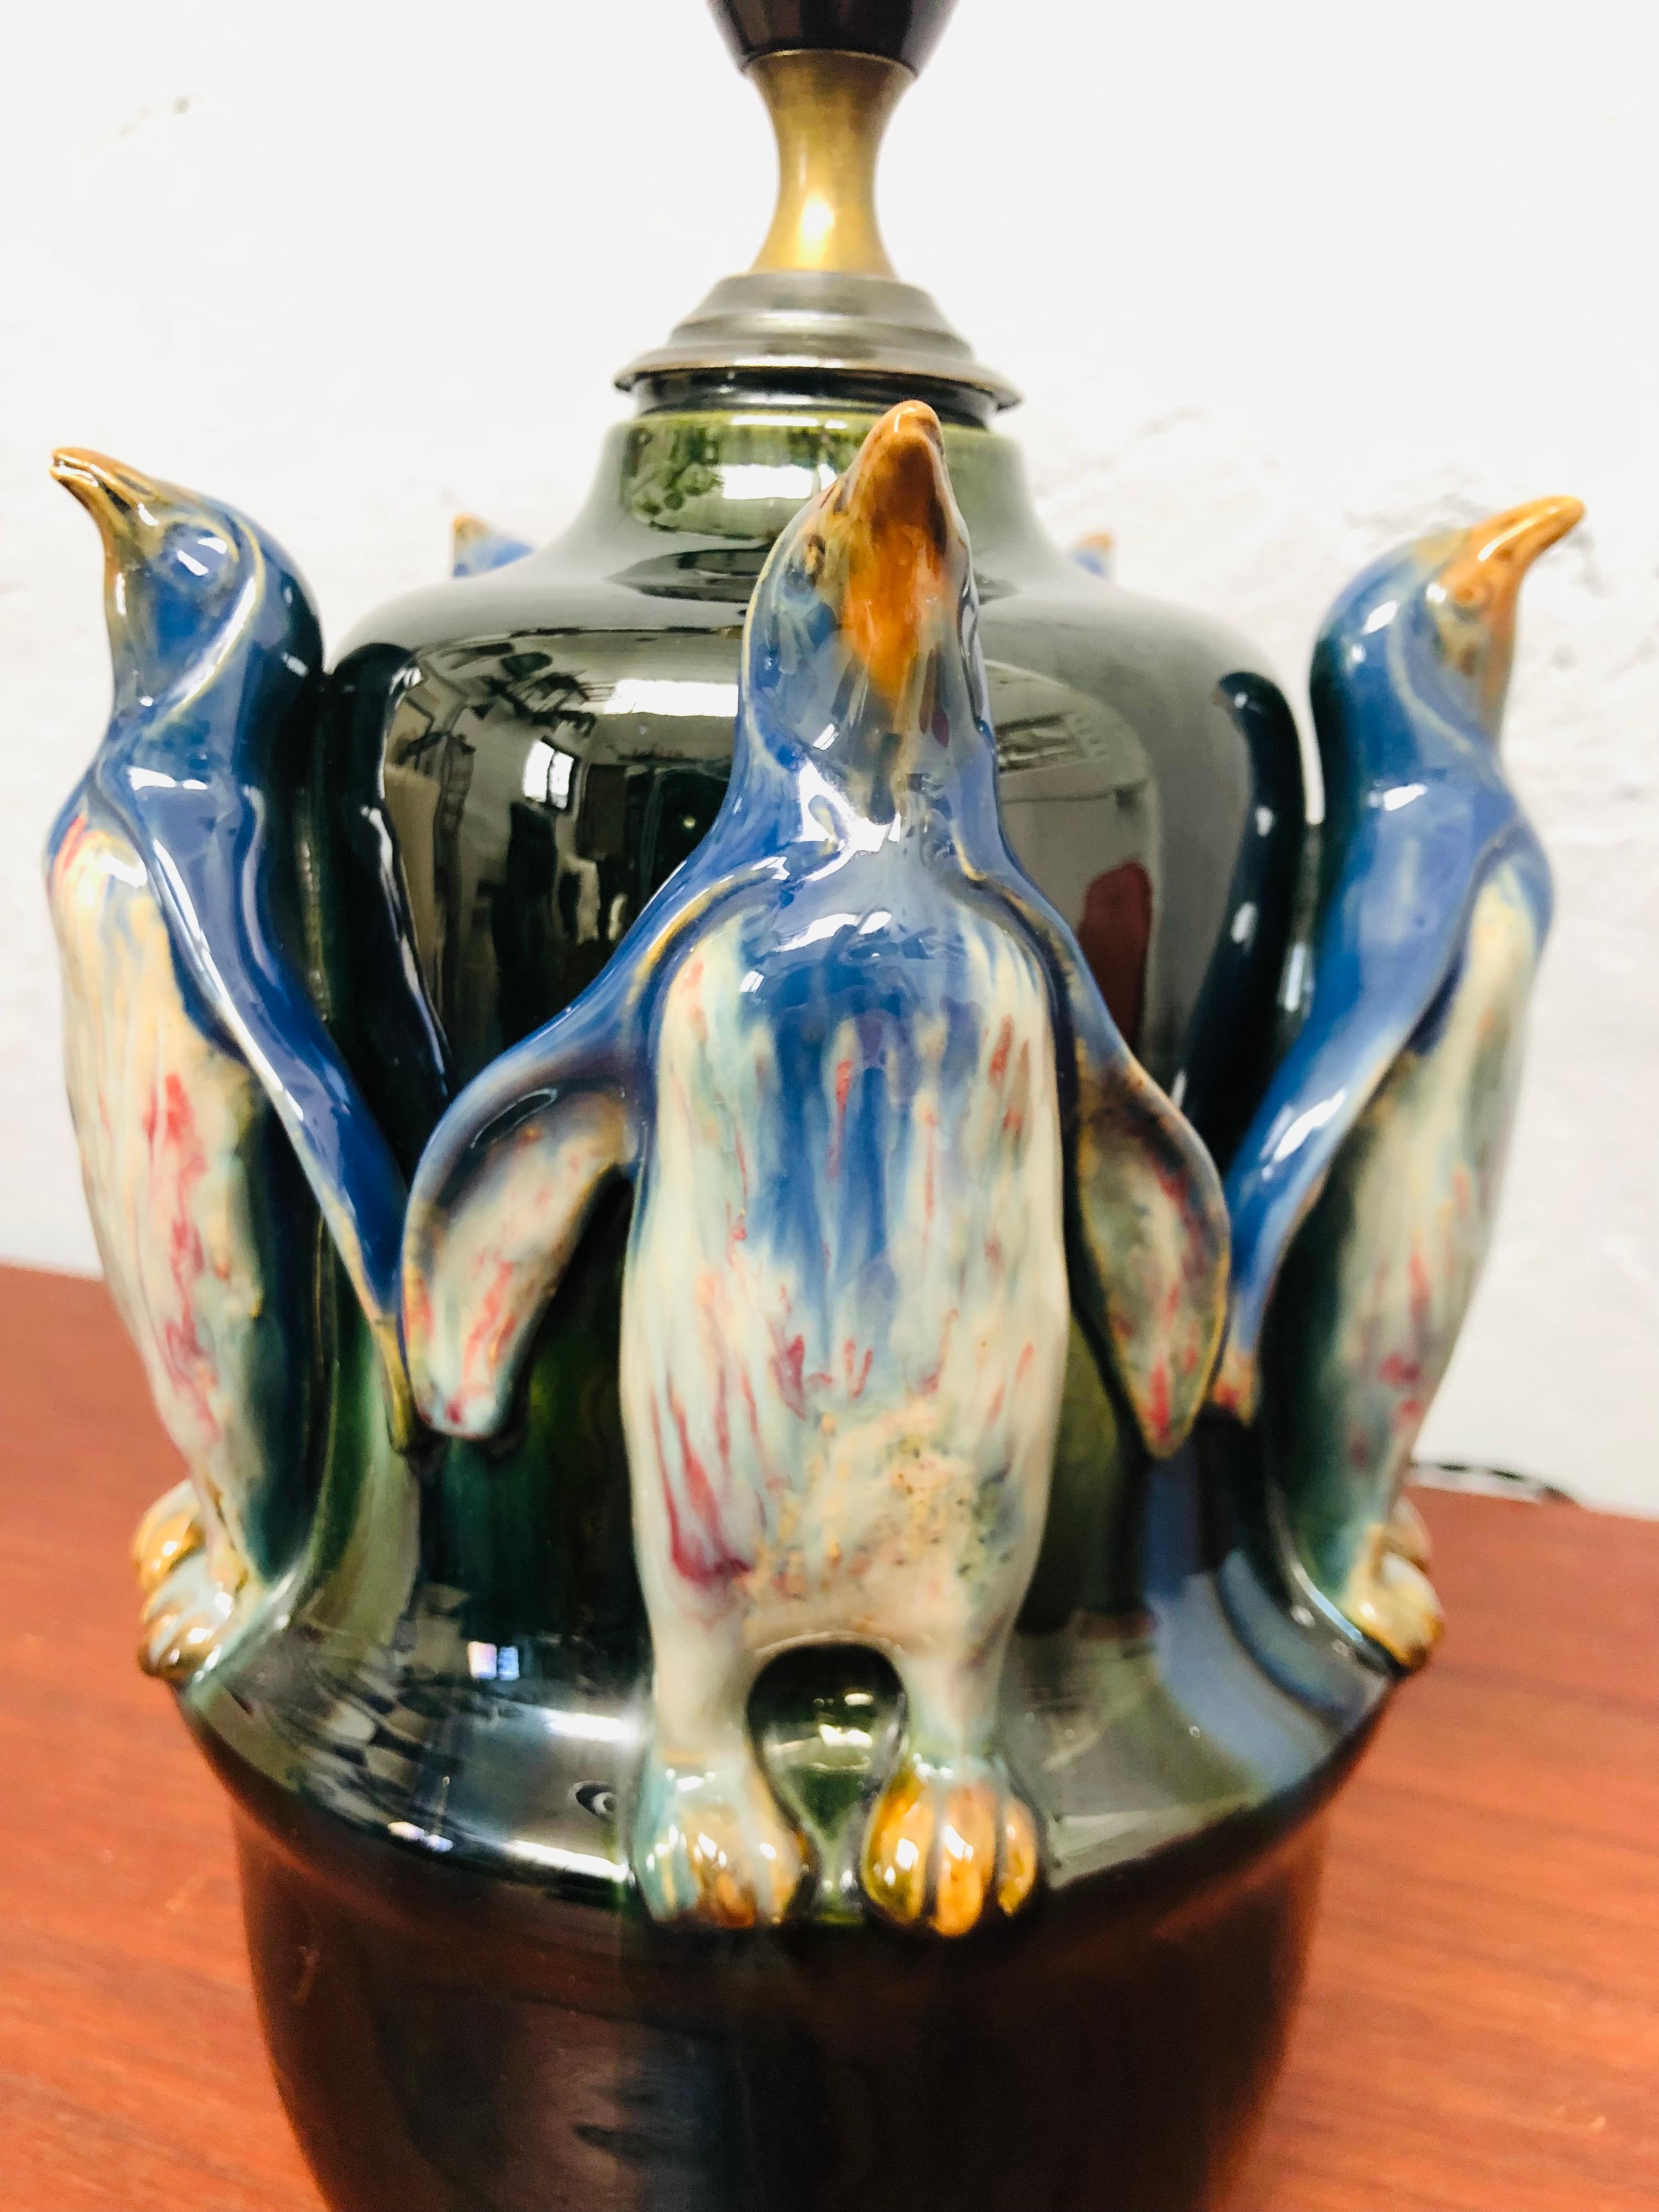 Antique pottery table lamp made by Michael Andersen & Son of Bornholm with penguins. 
5 Standing penguins around the core of the lamp. 
A very recognizable Michael Andersen glaze to the surface. 
In great condition for its age with very little